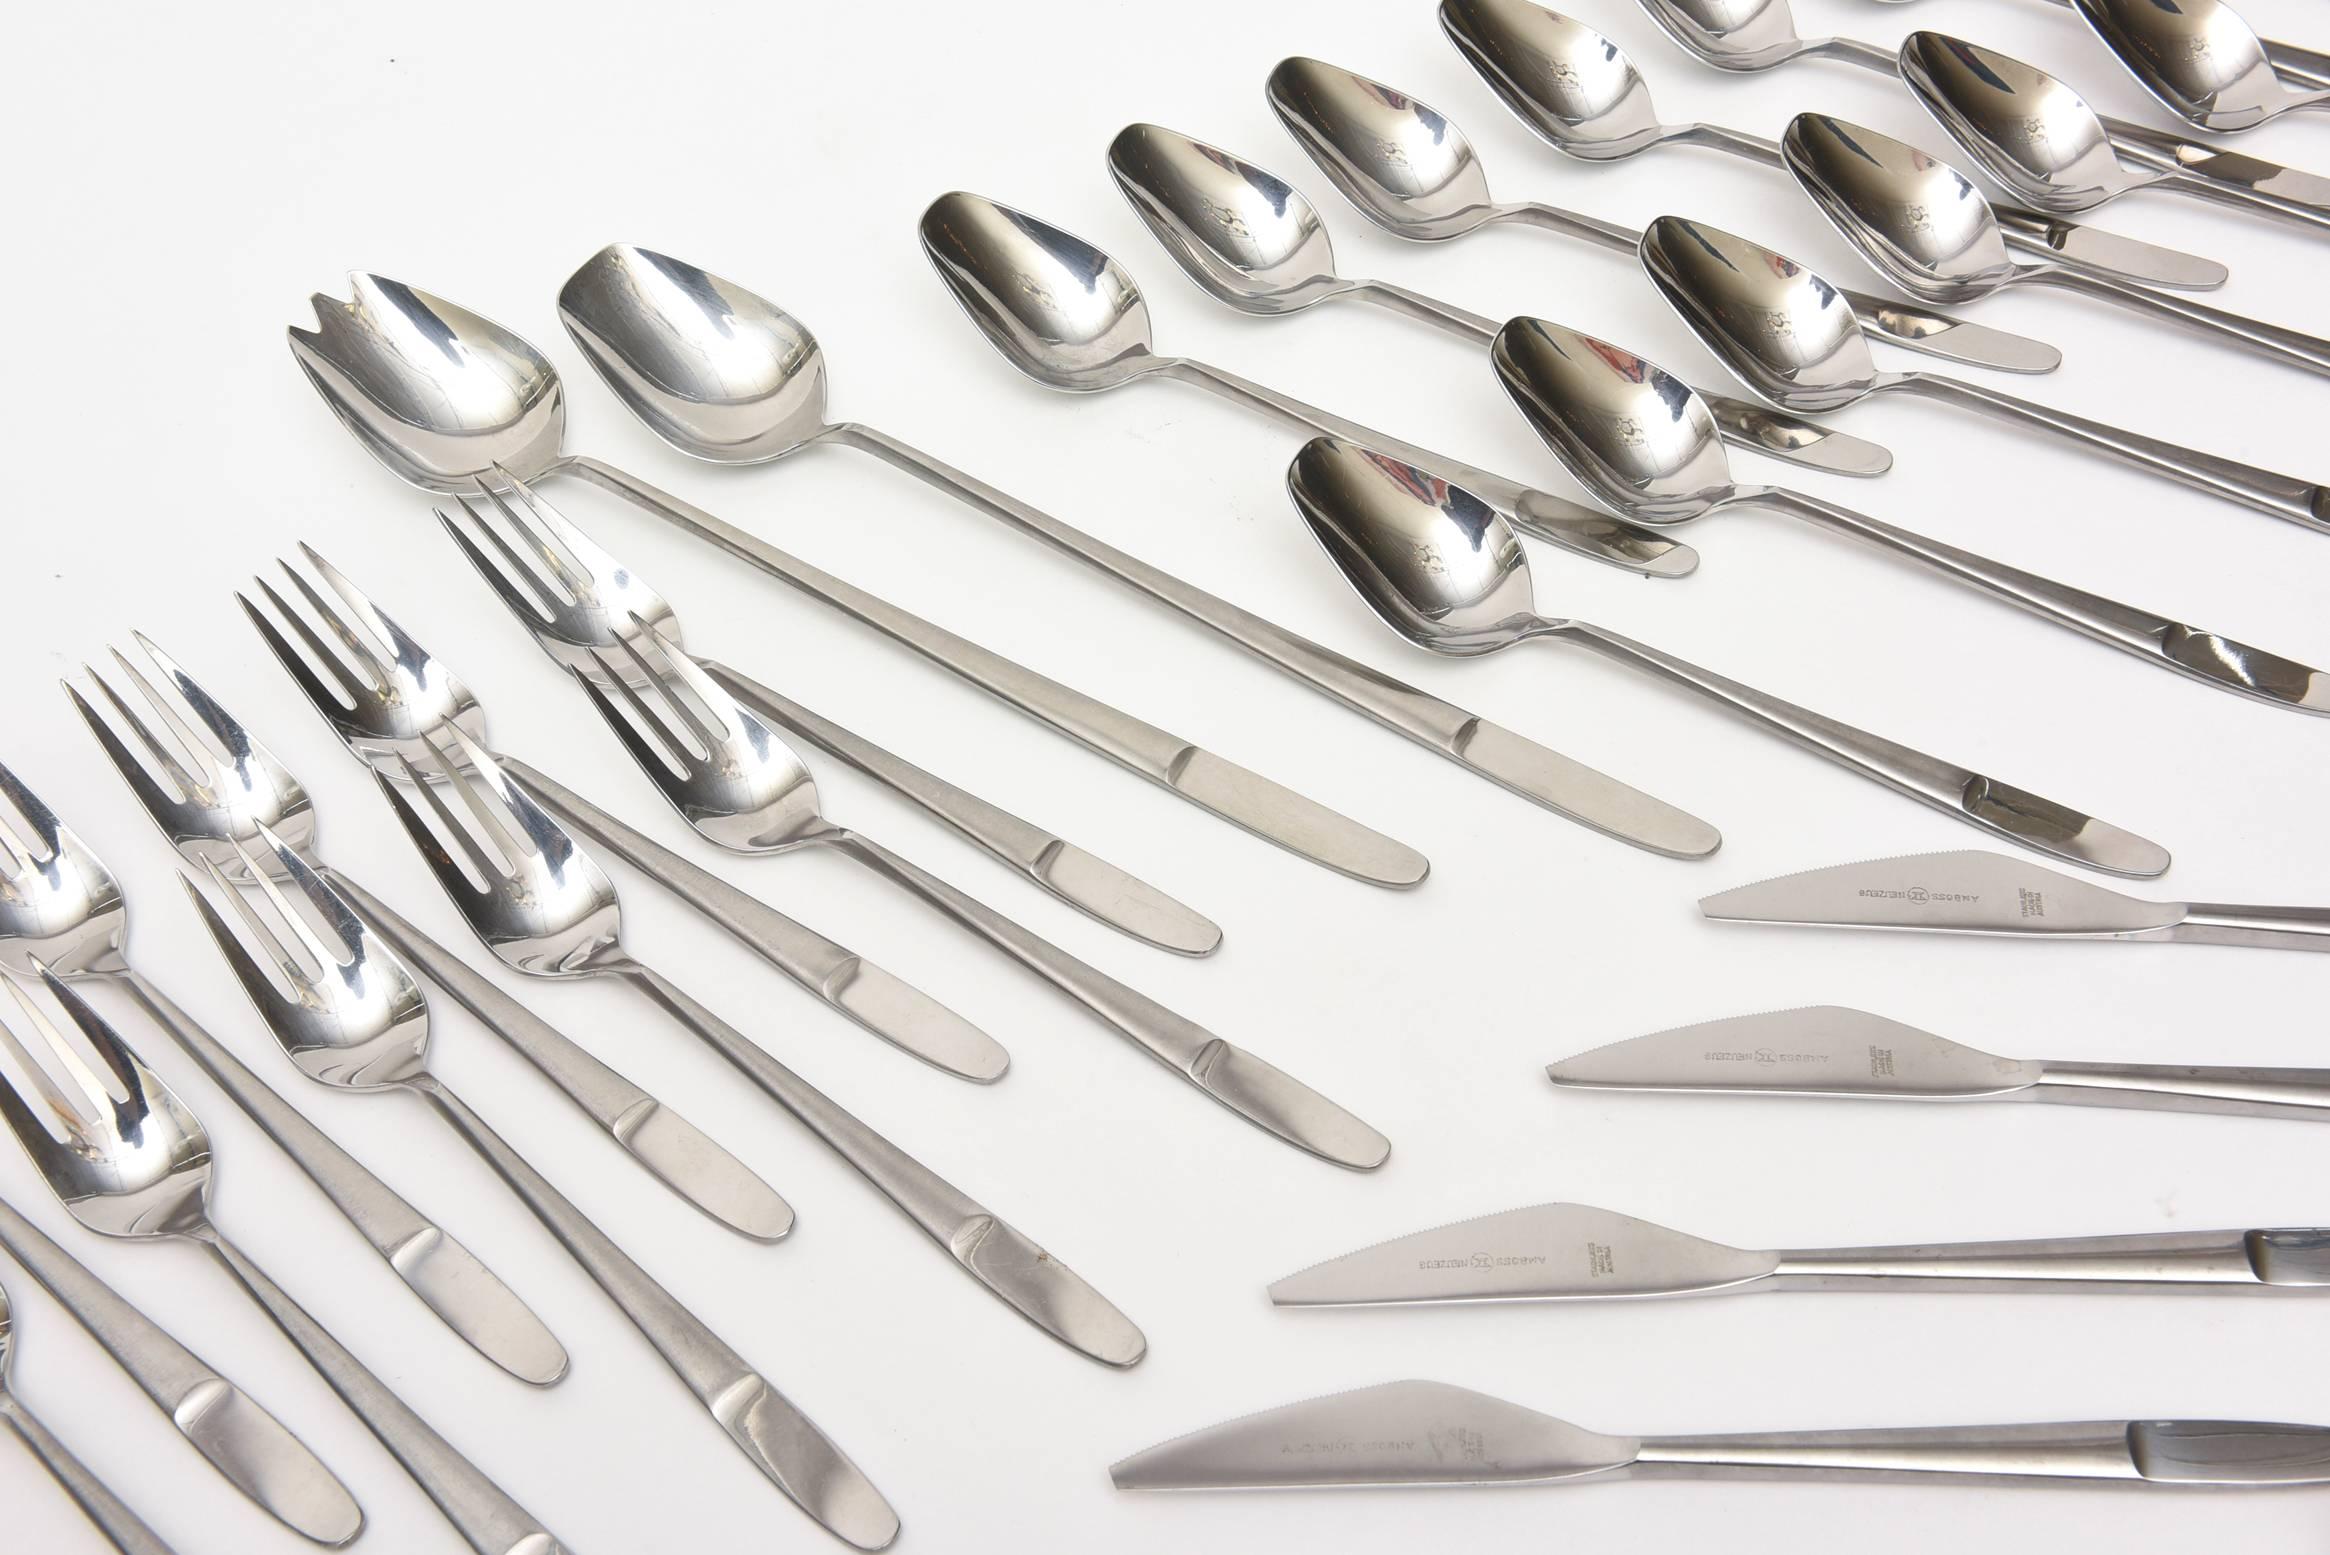 This wonderful set of high quality flatware made of stainless steel was designed by Helmut Adler for the manufacturer of Amboss Austria. It is called the Concept Pattern #2070. It remains today timeless and modern. It was done in the 1960s. Amboss